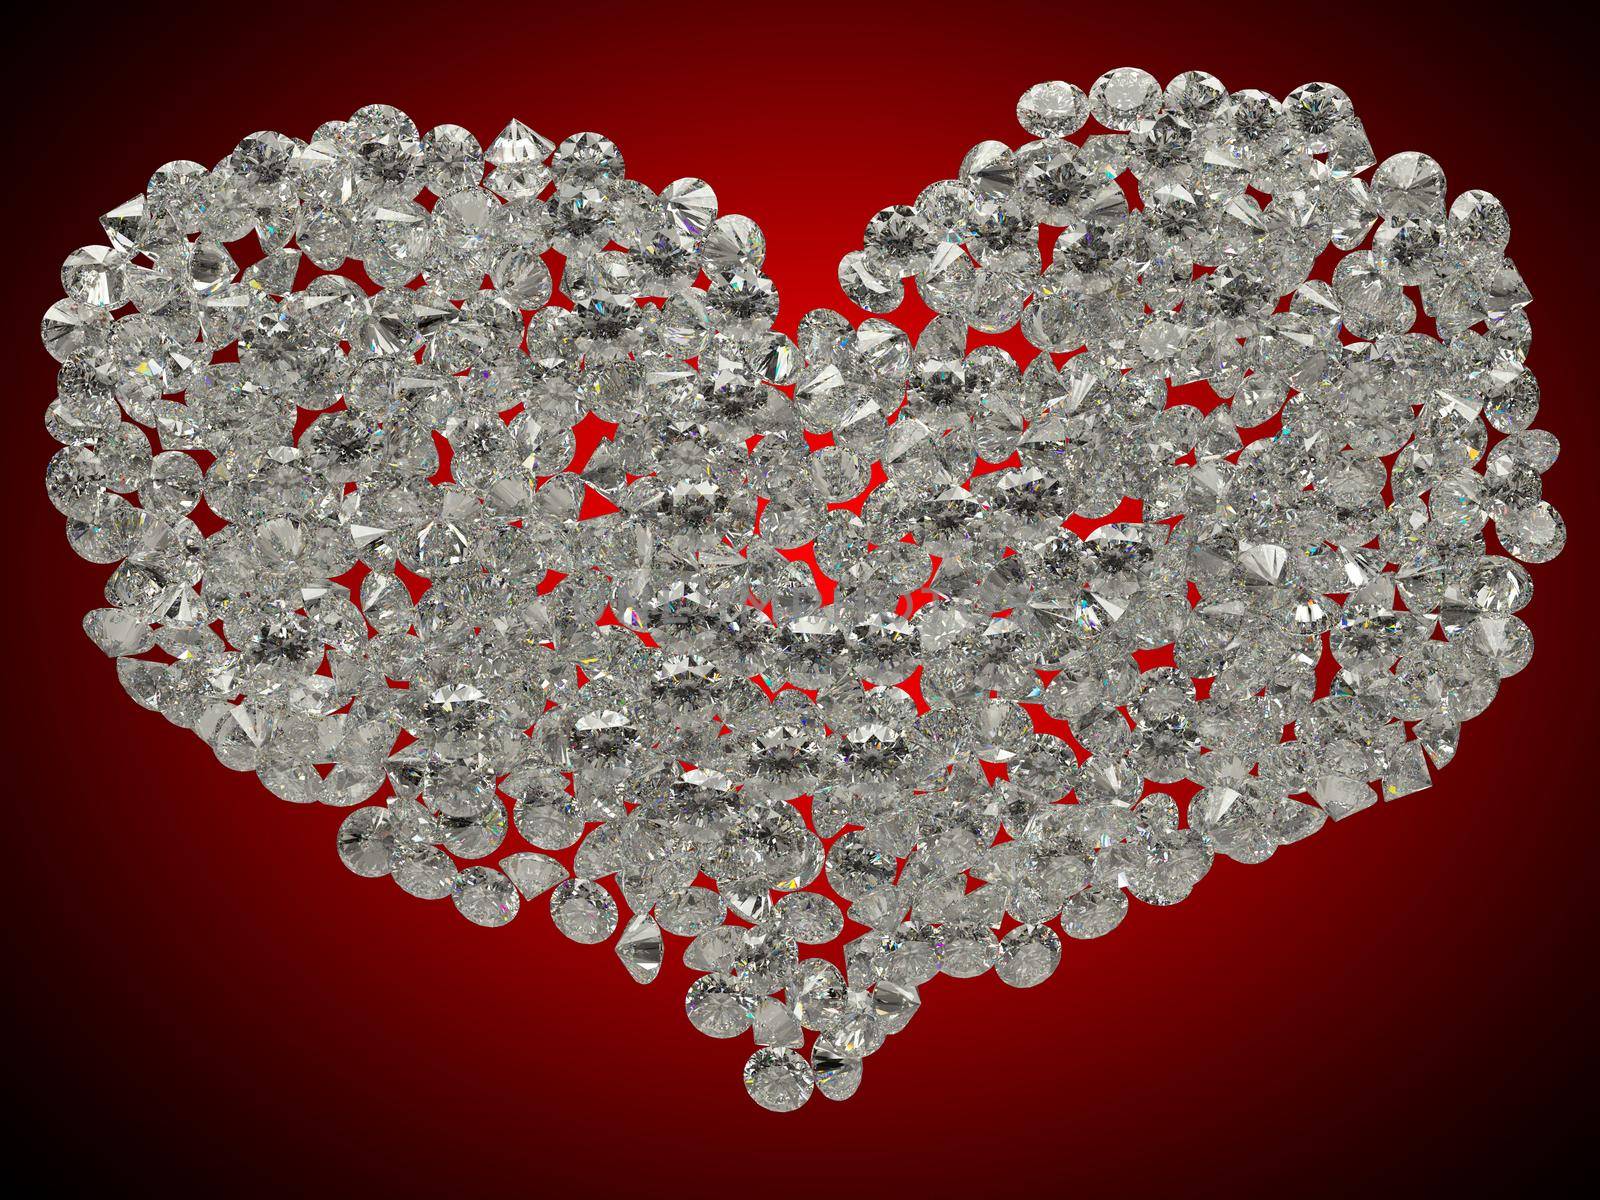 Sparkling gems or diamonds heart shape on red